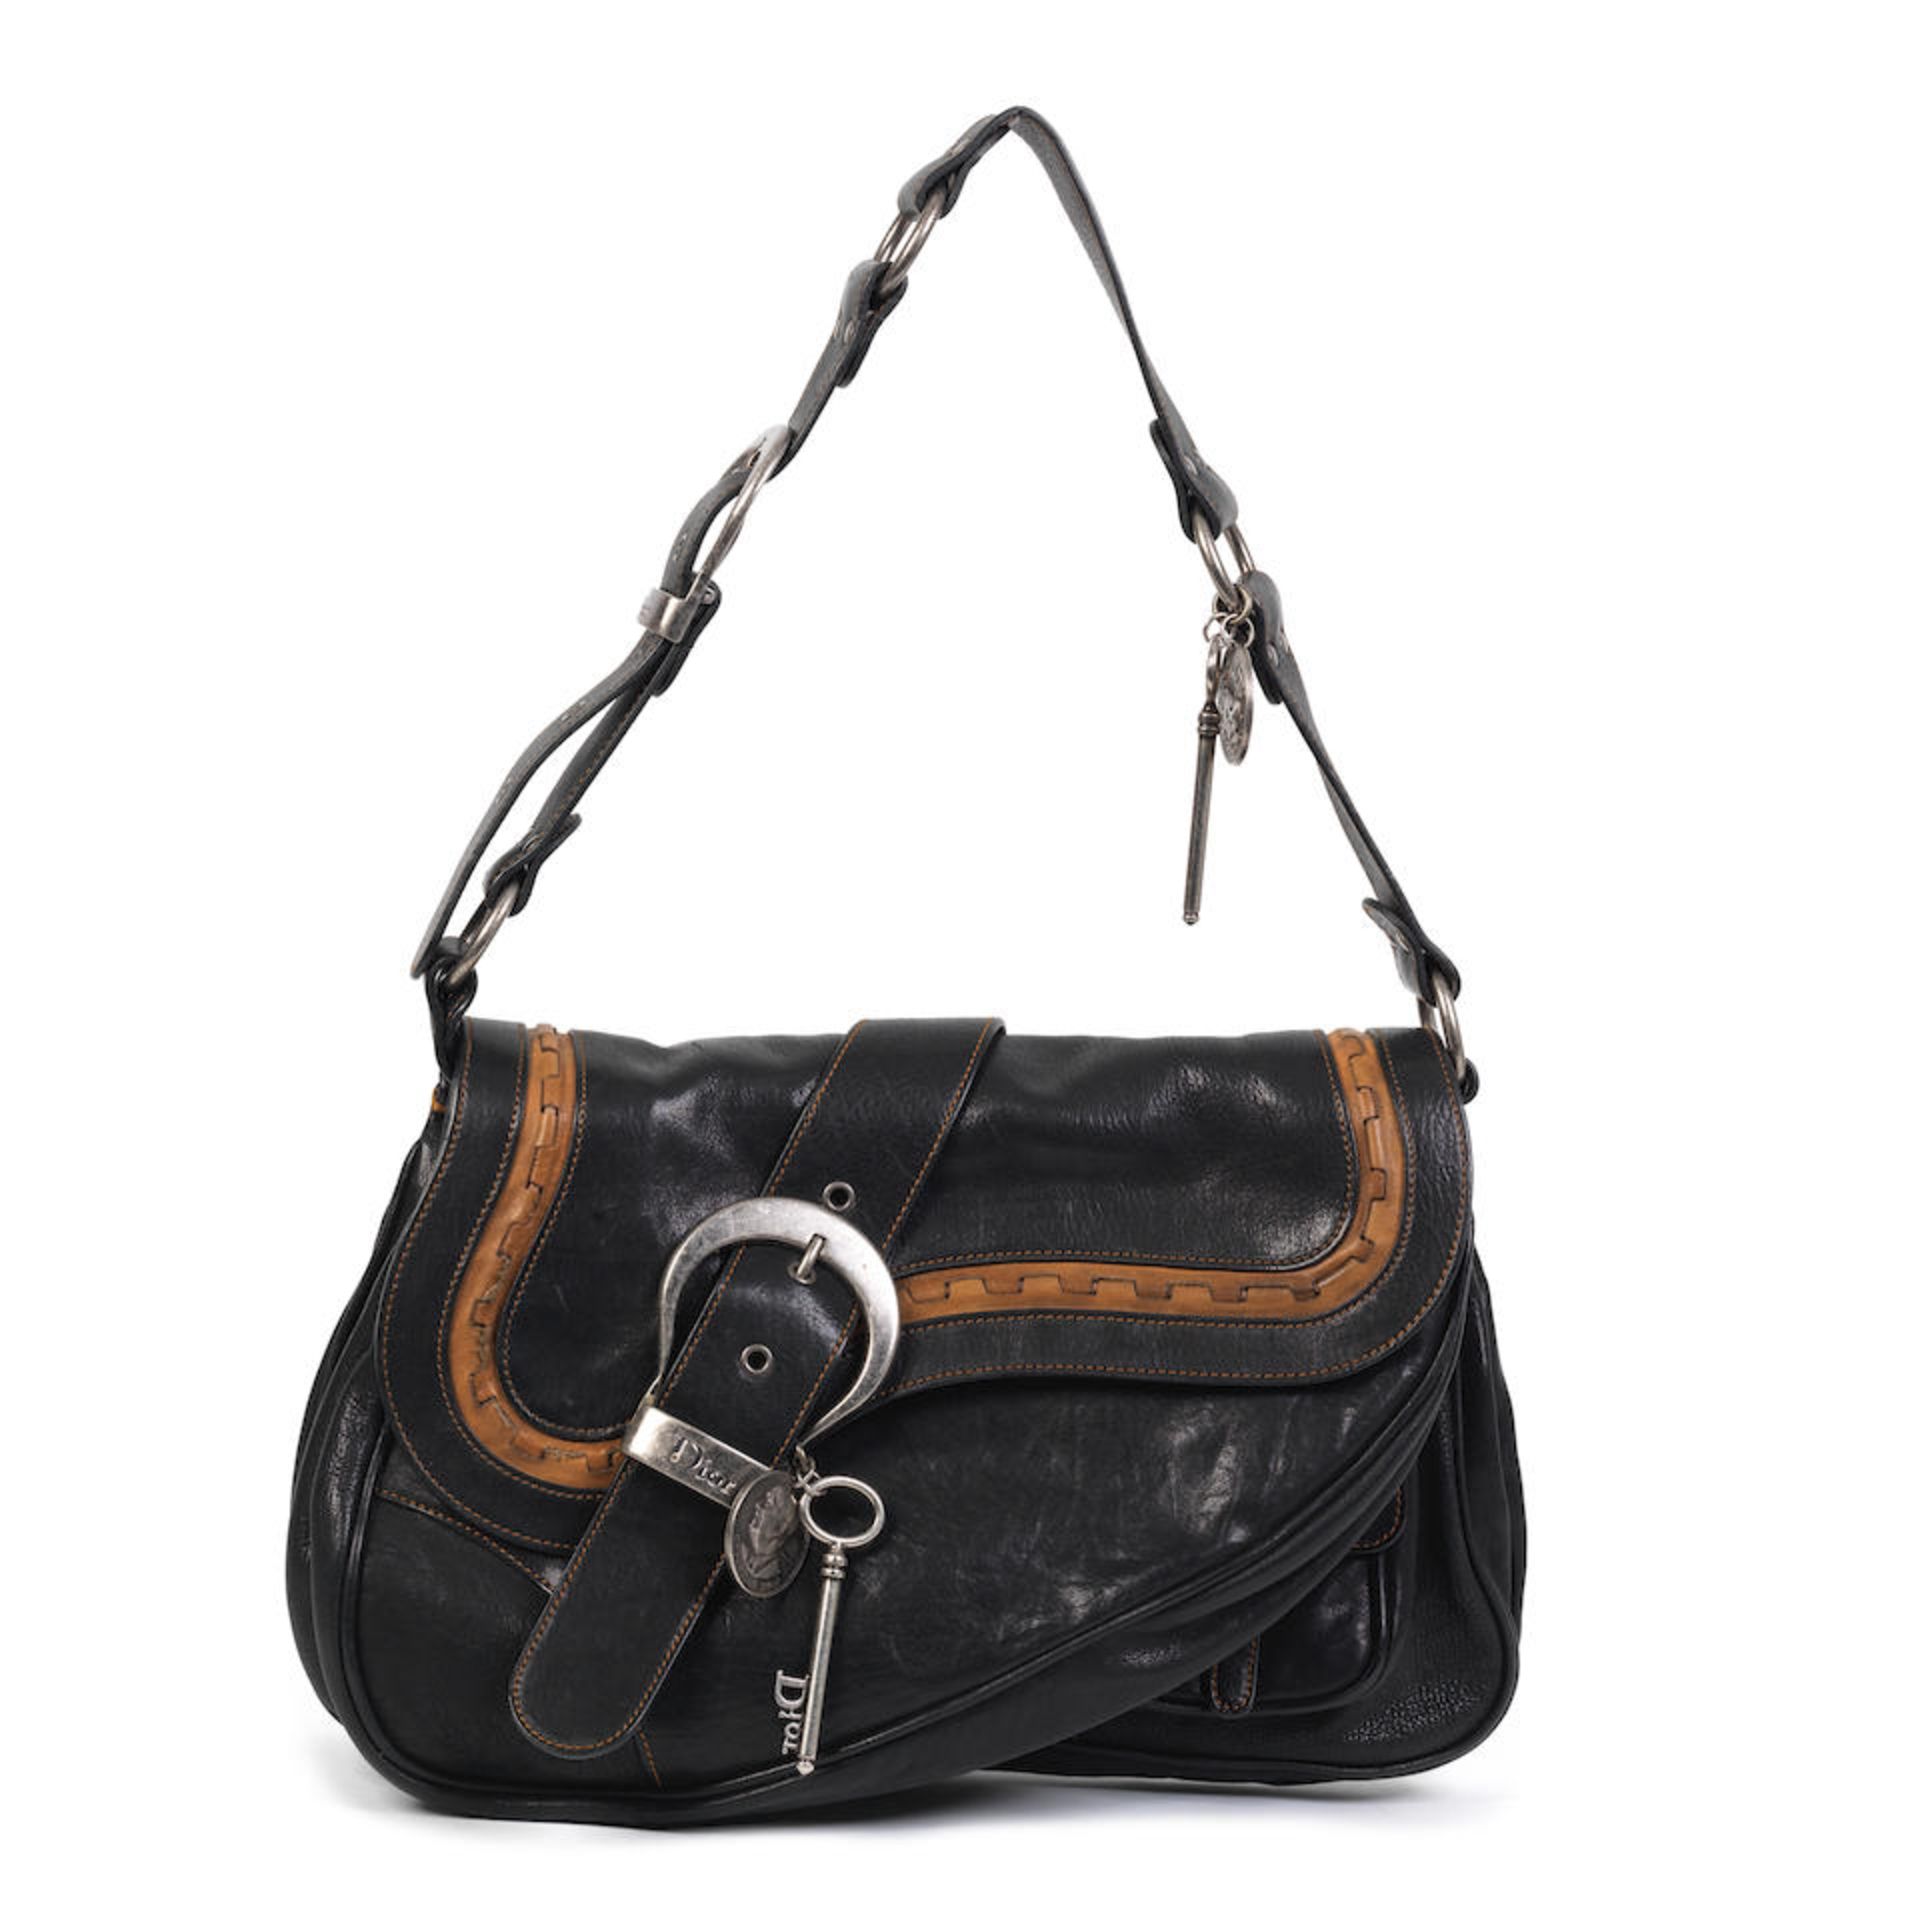 John Galliano for Christian Dior: a Black Leather Double Gaucho Saddle Shoulder Bag 2006 (includ...